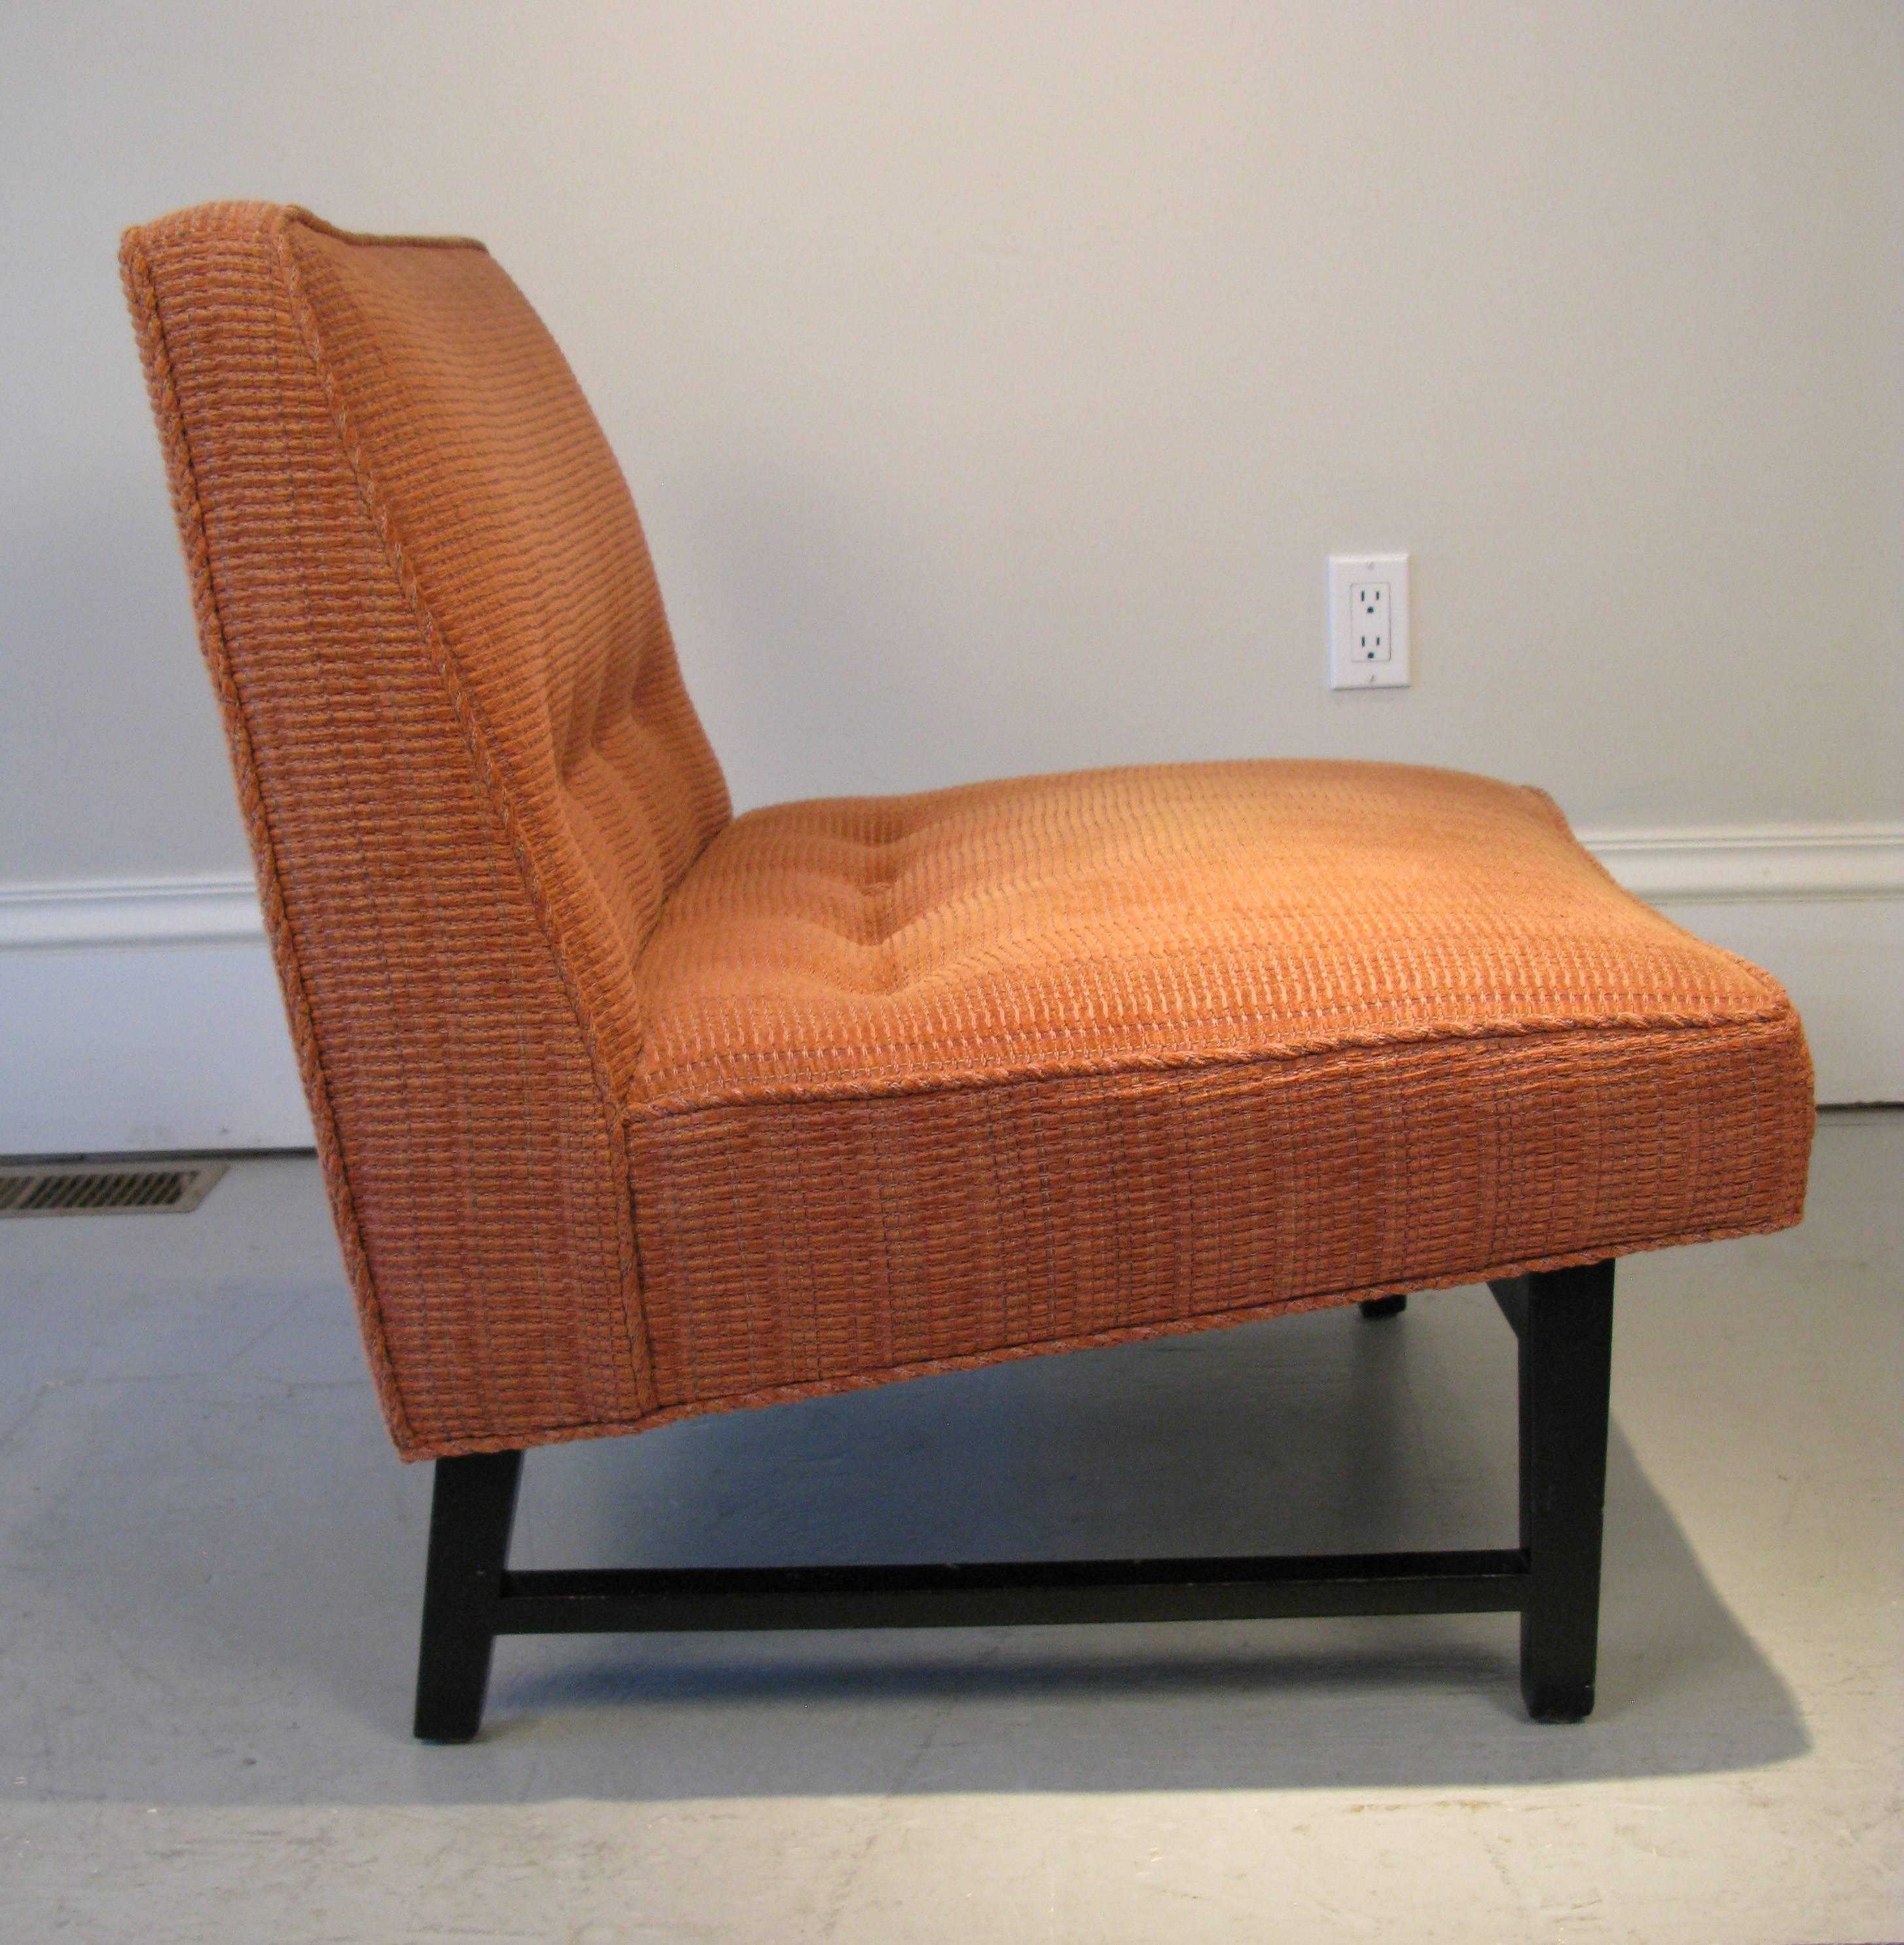 American Pair of Dunbar Lounge or Slipper Chairs by Edward Wormley